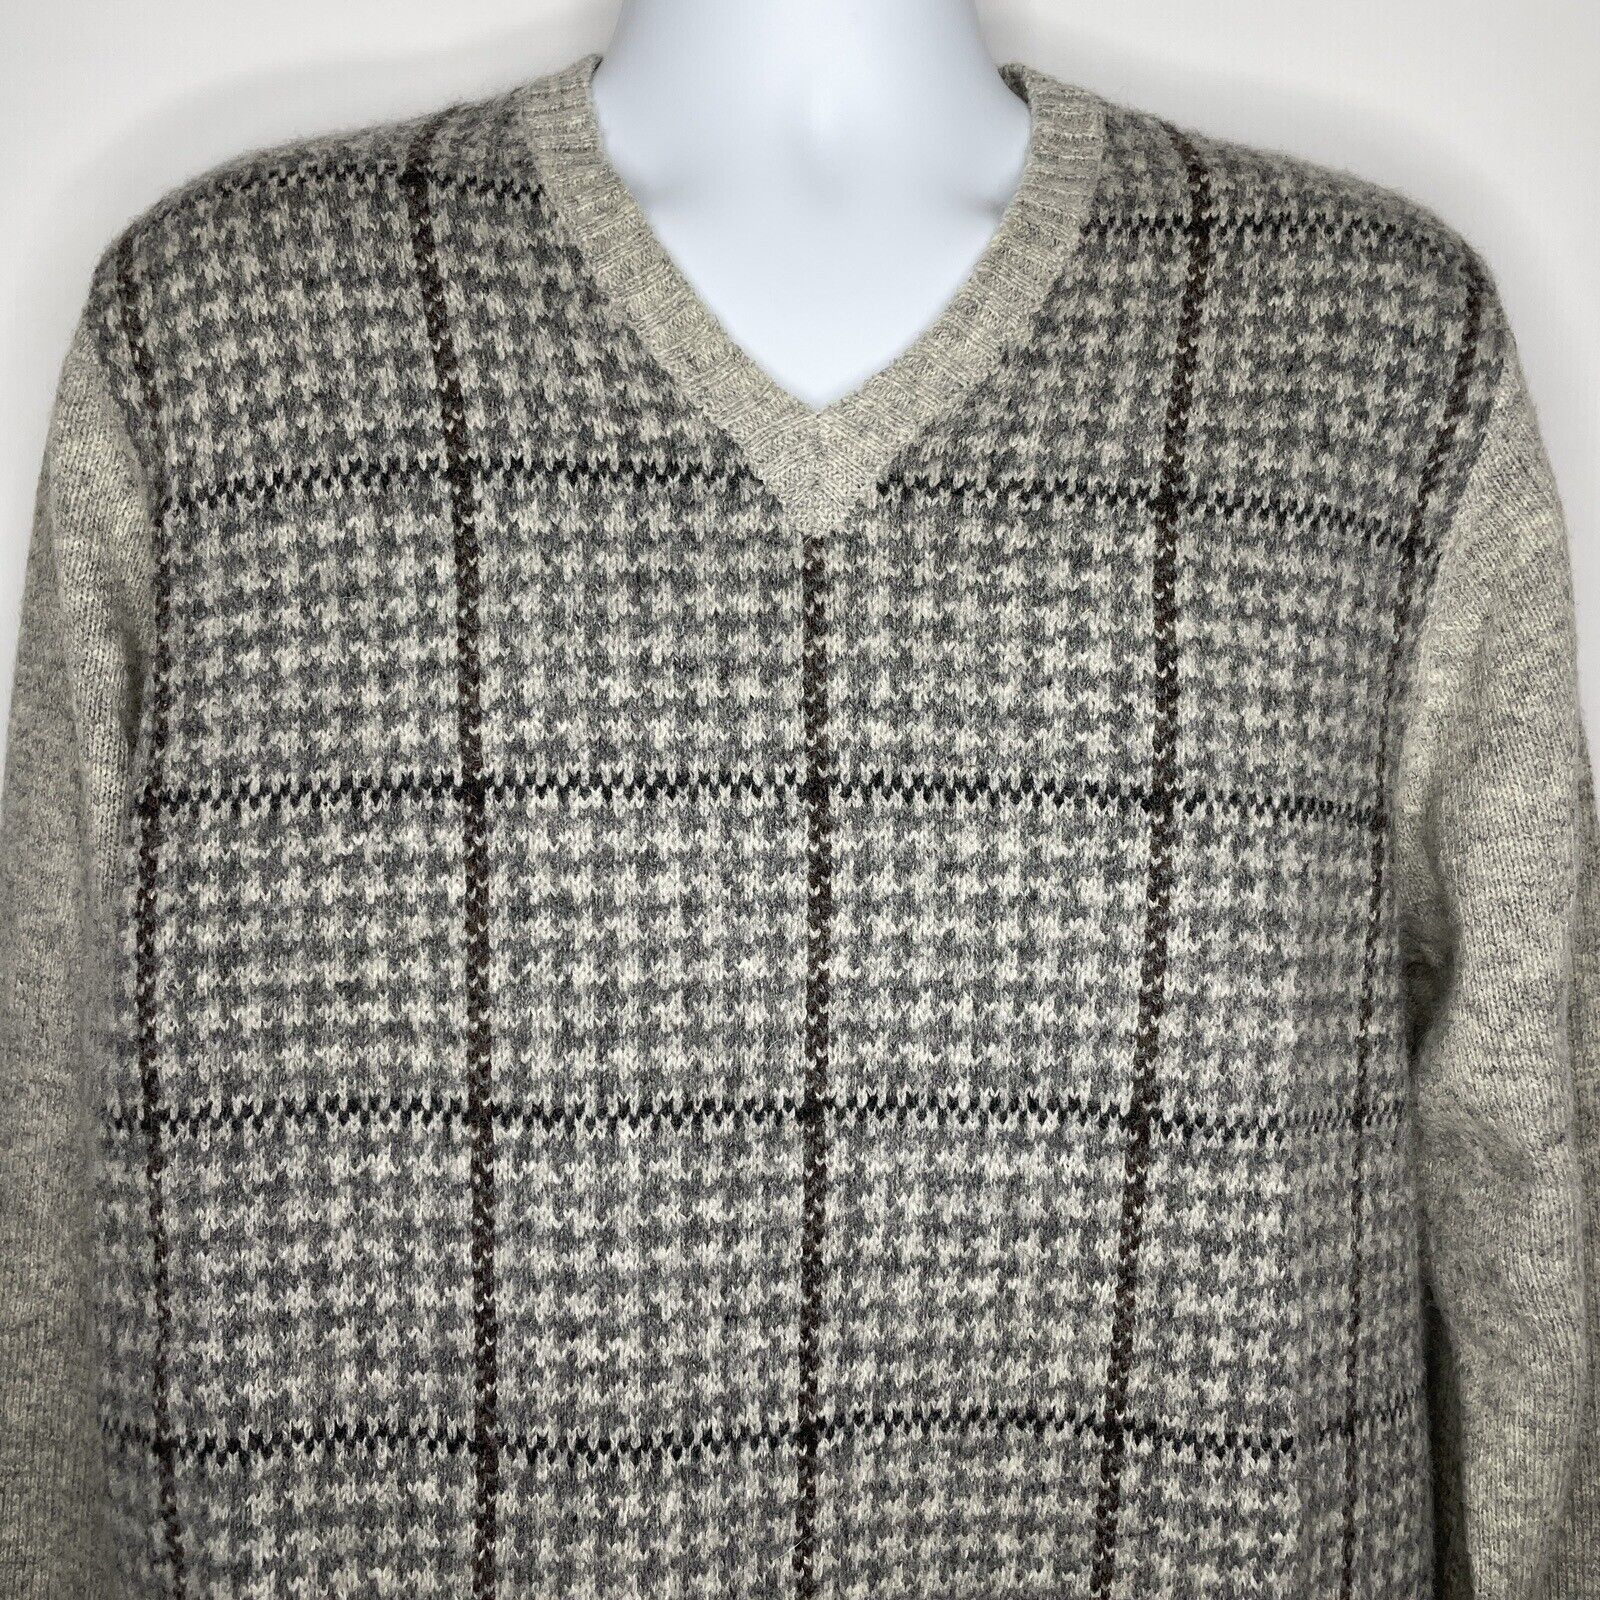 Vintage 80s Gray Shetland Wool Houndstooth Plaid Pullover Sweater Size US L / EU 52-54 / 3 - 2 Preview